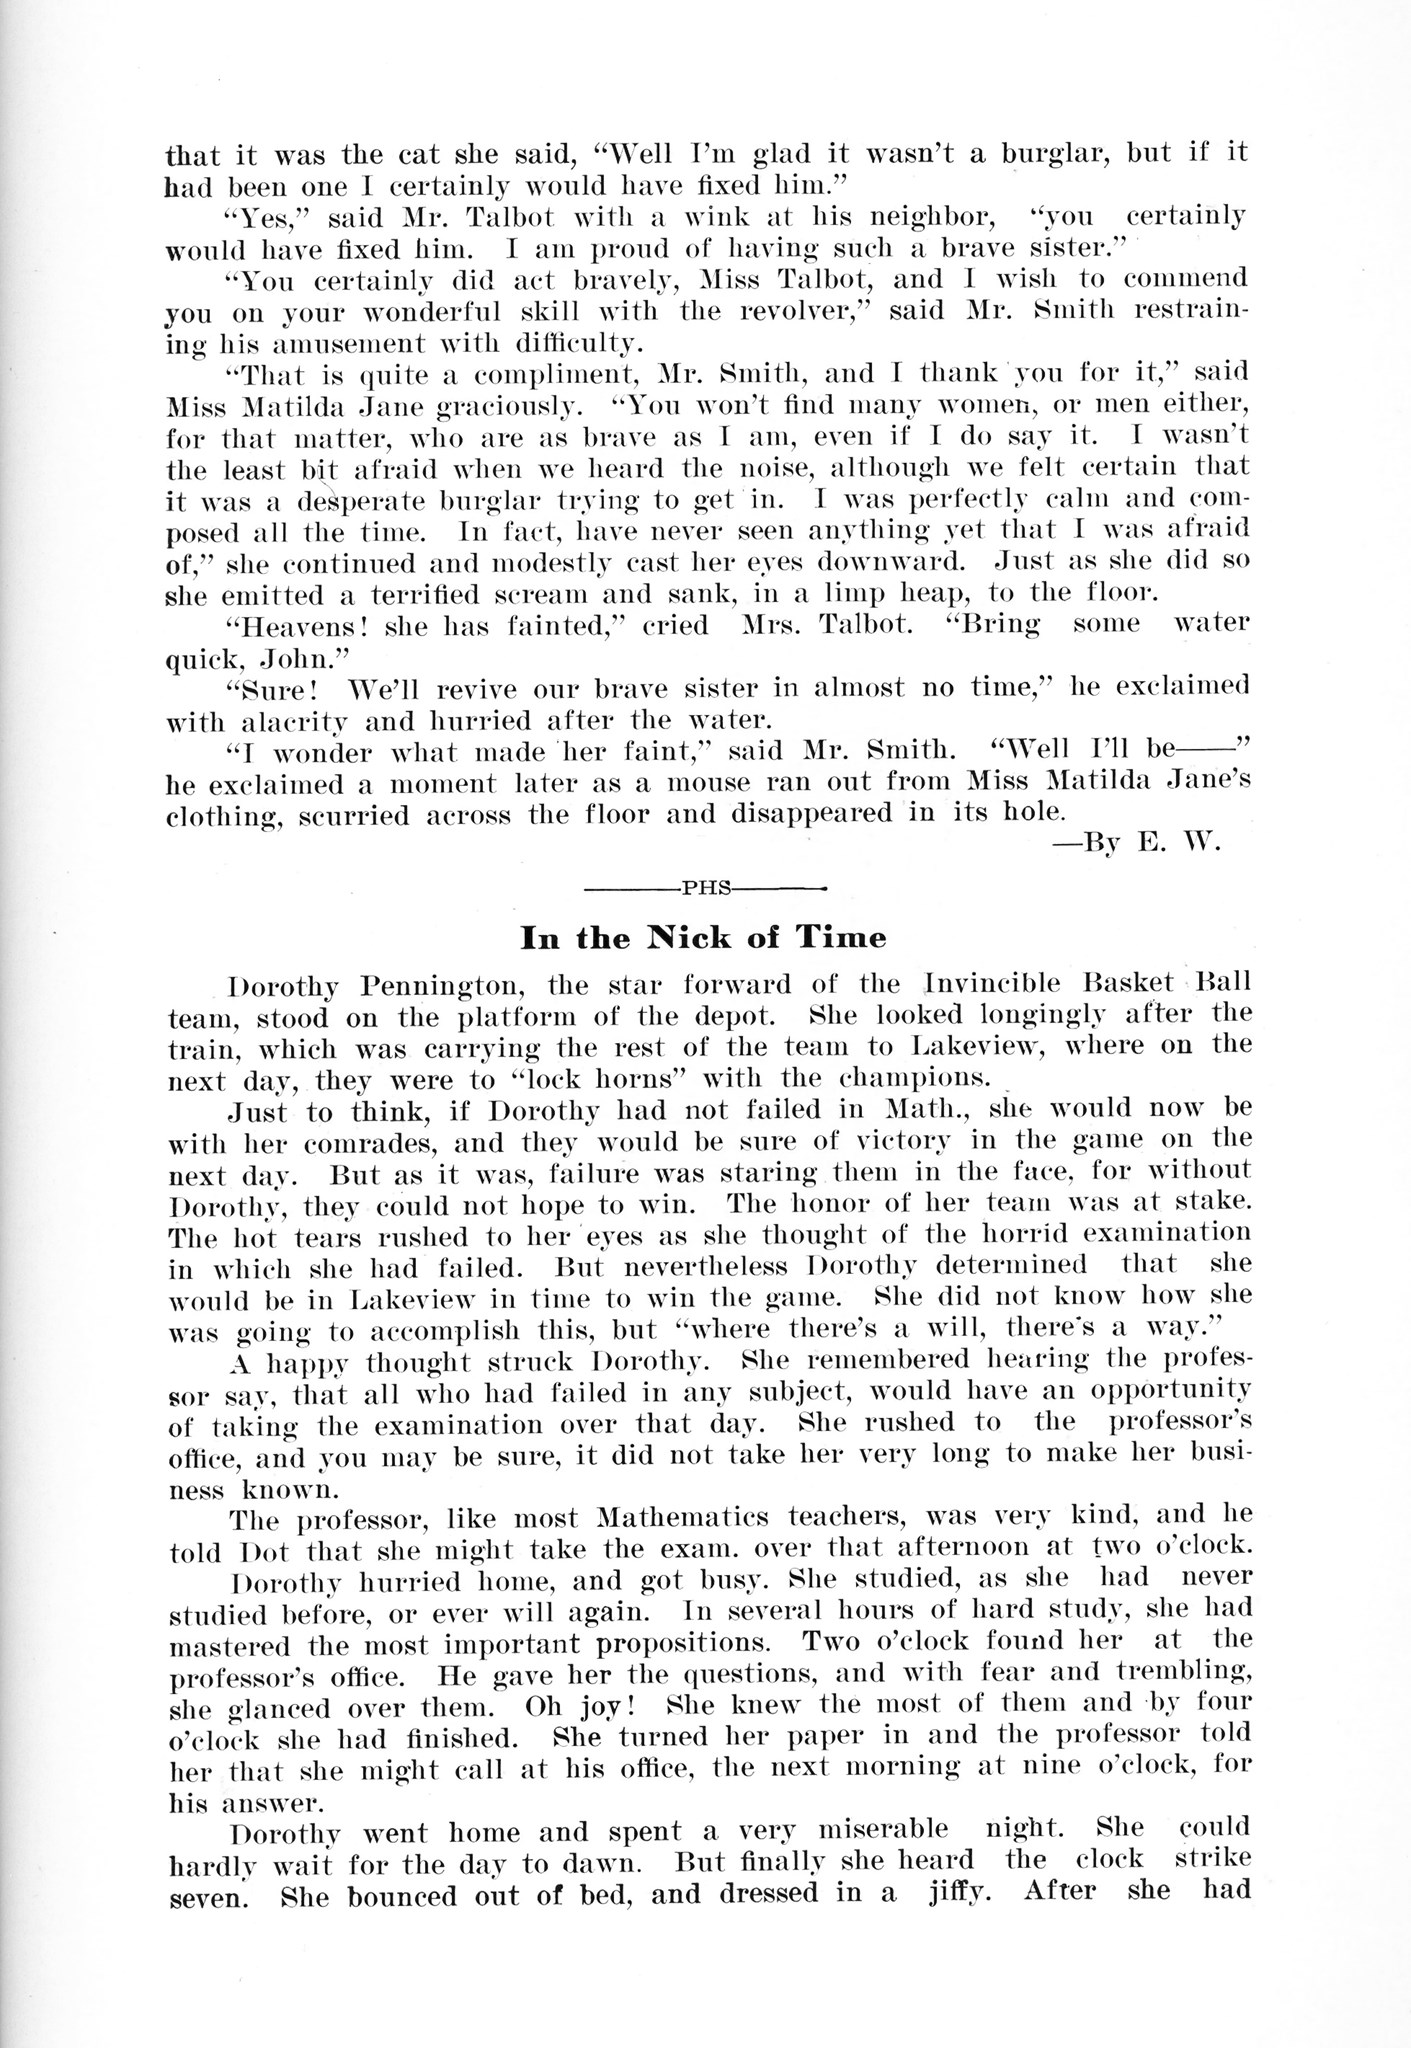 ../../../Images/Large/1913/Arclight-1913-pg0081.jpg